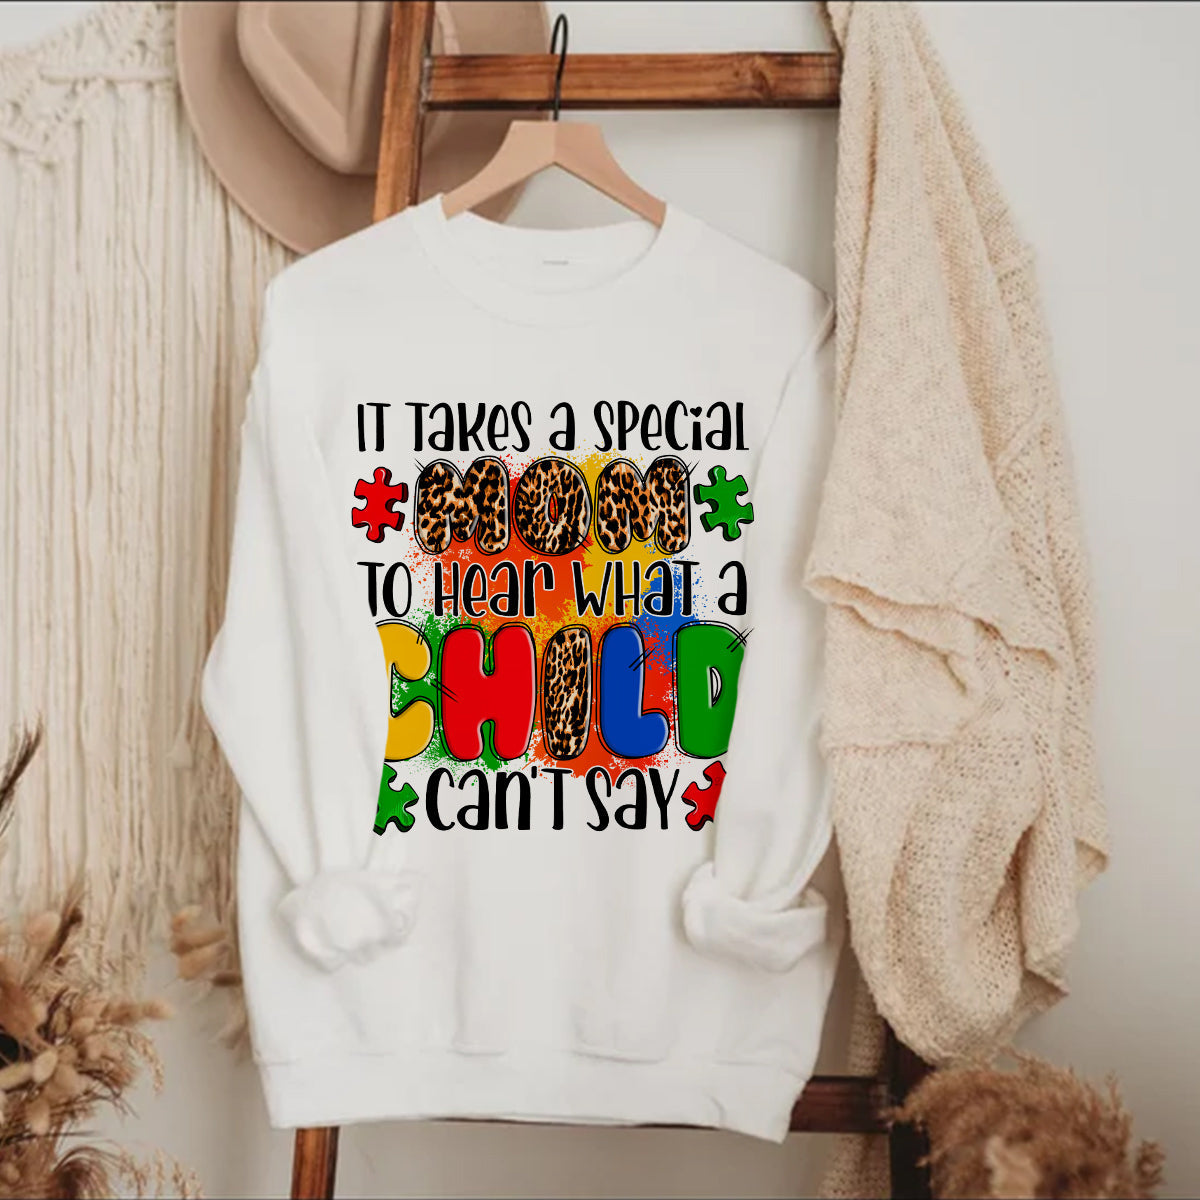 Teesdily | Autism Mom Leopard Shirt, A Mother's Special Love It Takes A Special Mom Hoodie Sweatshirt Mug, Mothers Day Gifts, Autism Support Gifts